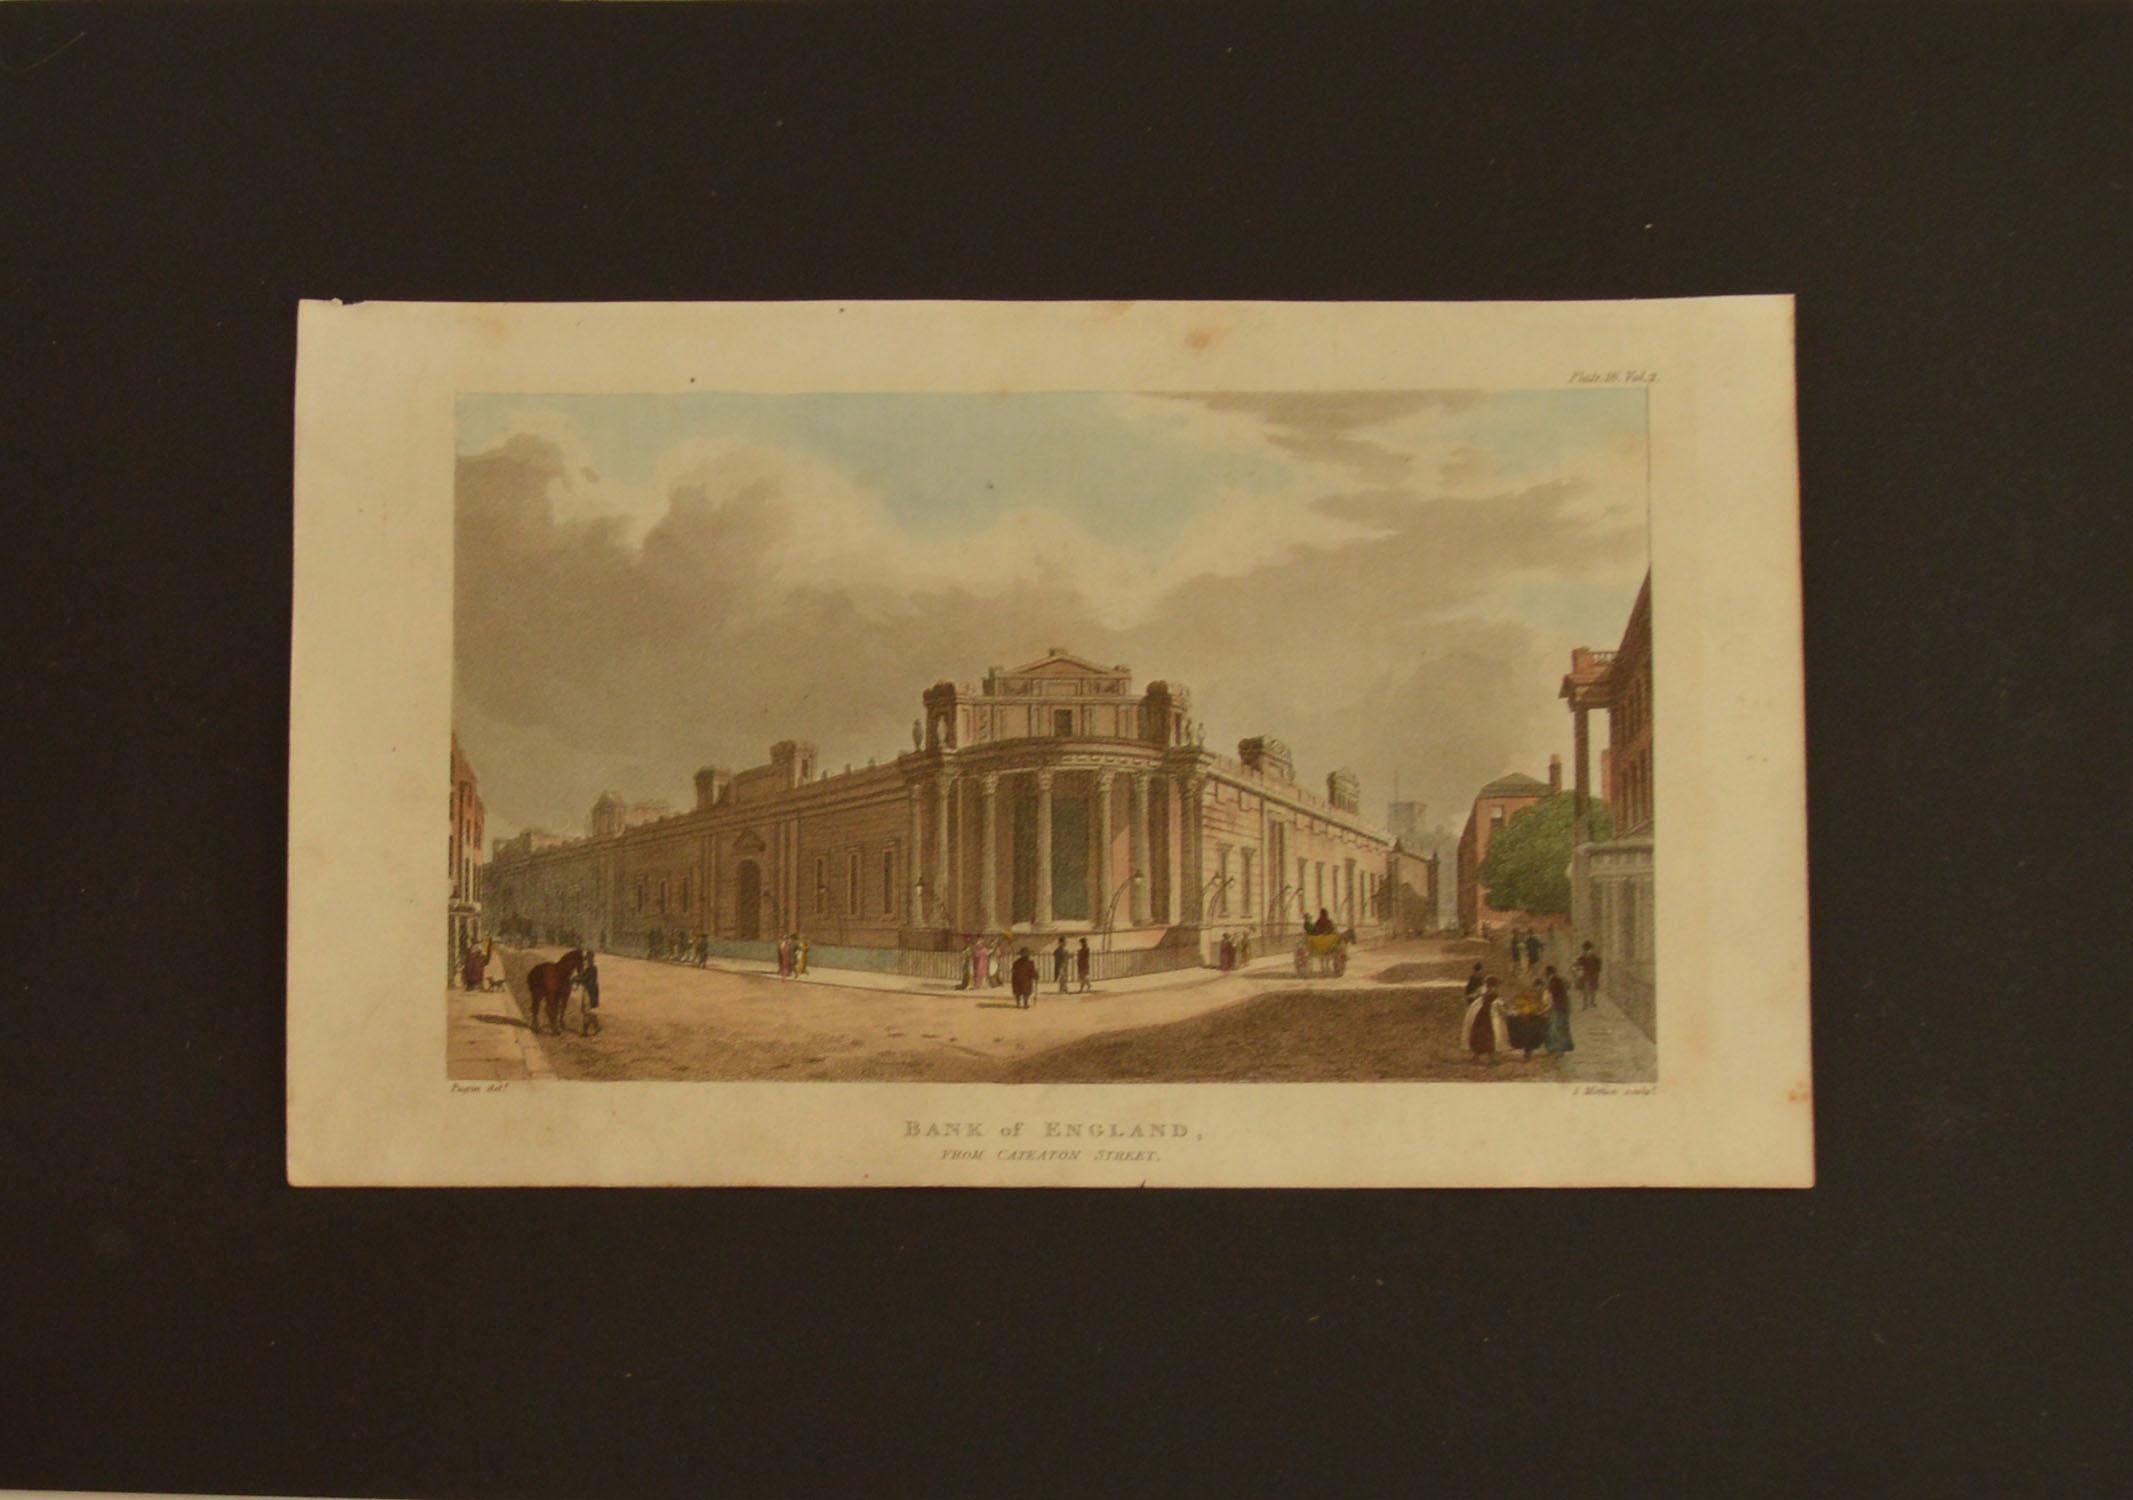 English Set of 5 Antique Architectural Prints of London after Pugin, Dated 1809